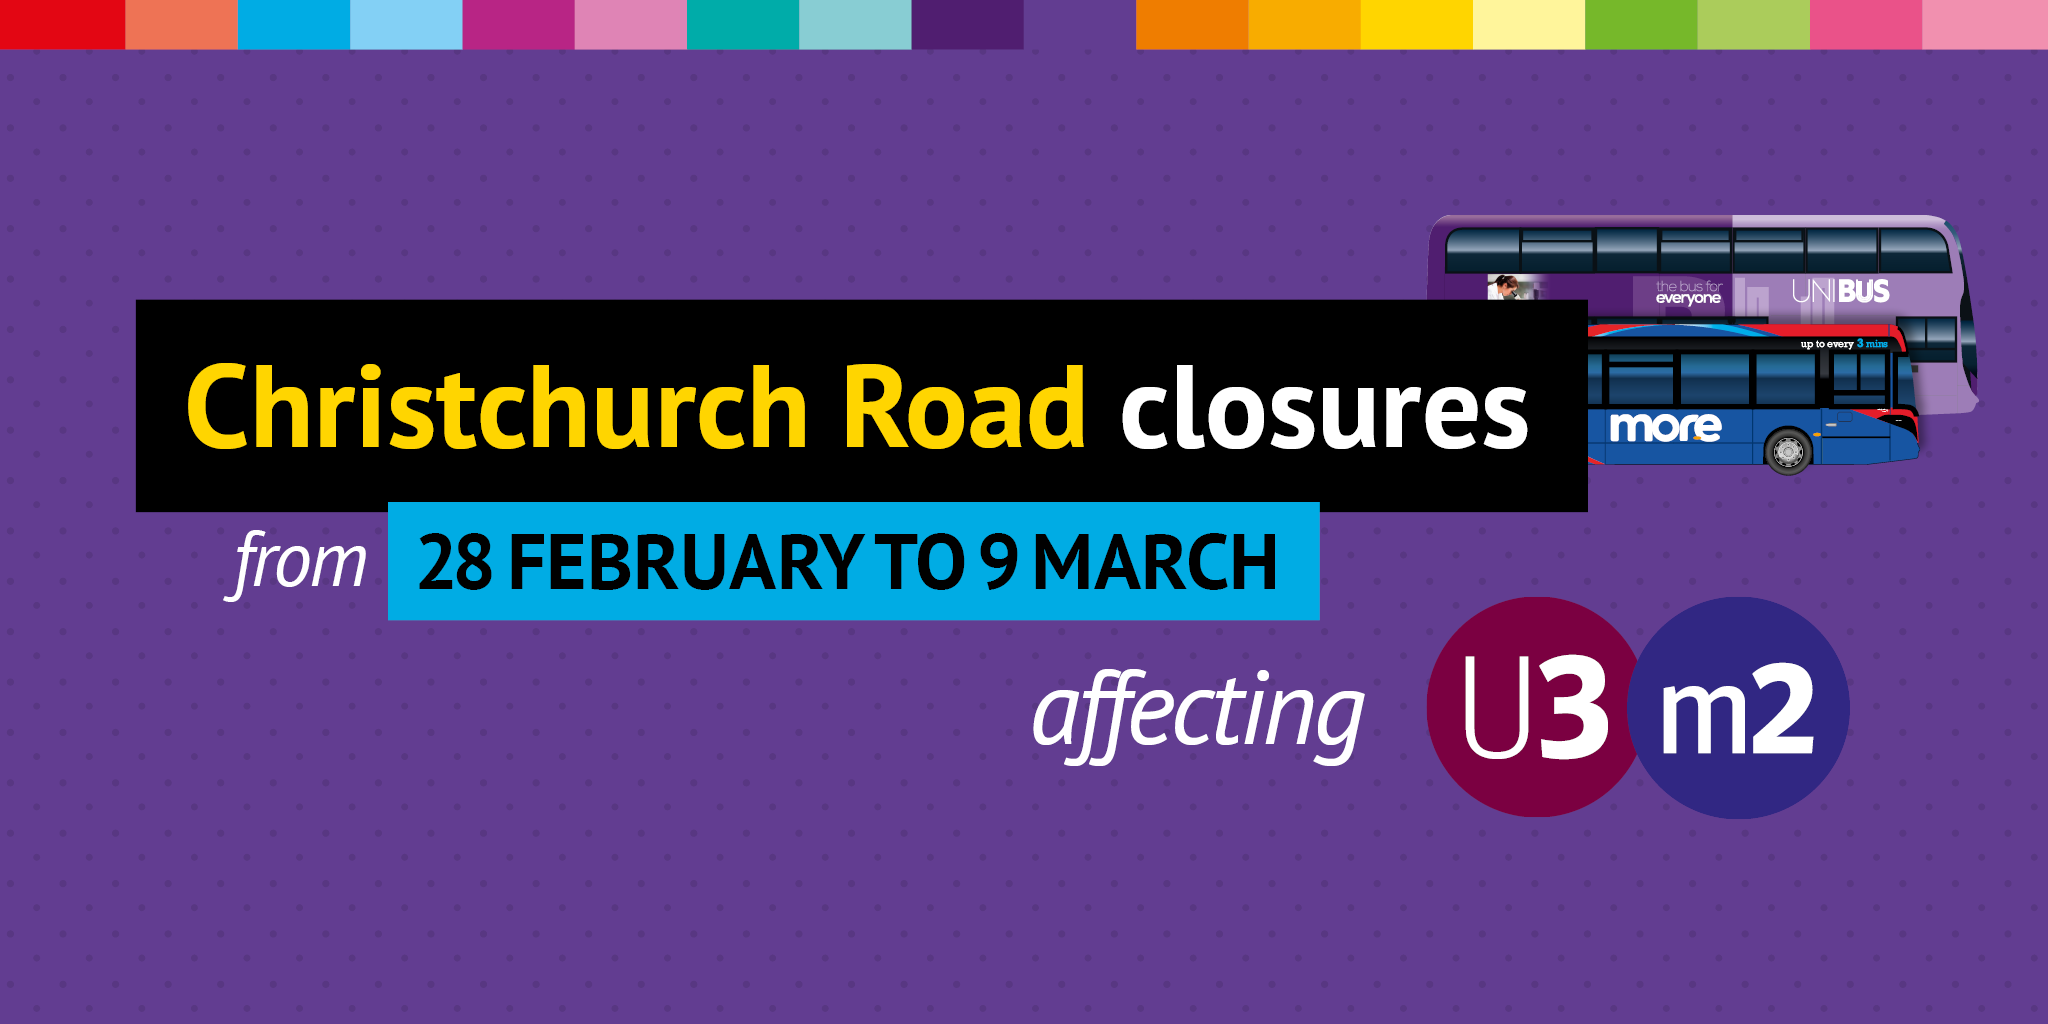 christchurch road closure from monday 28th feb to wednesday 9th march - u3 and m2